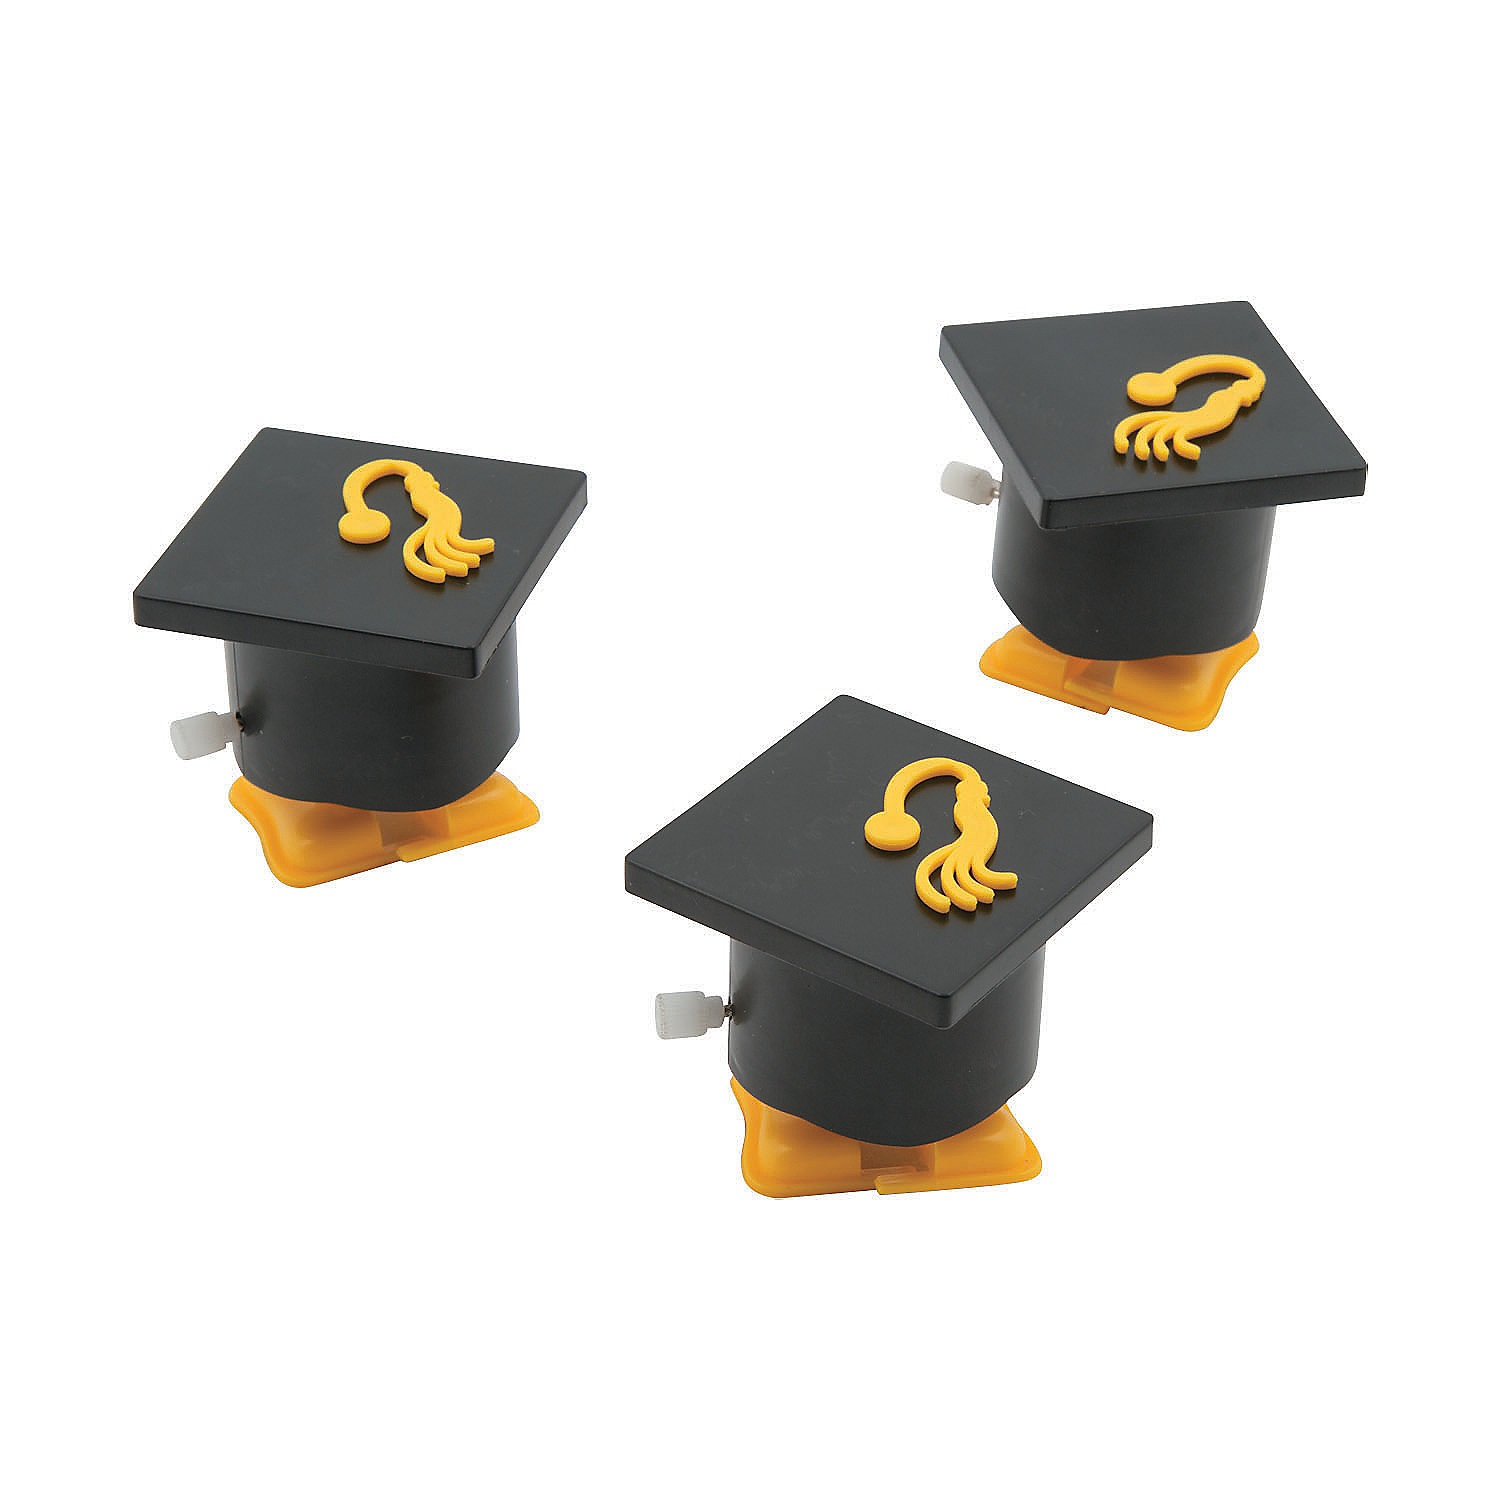 wind-up-mortarboards-12-pc-_13801530